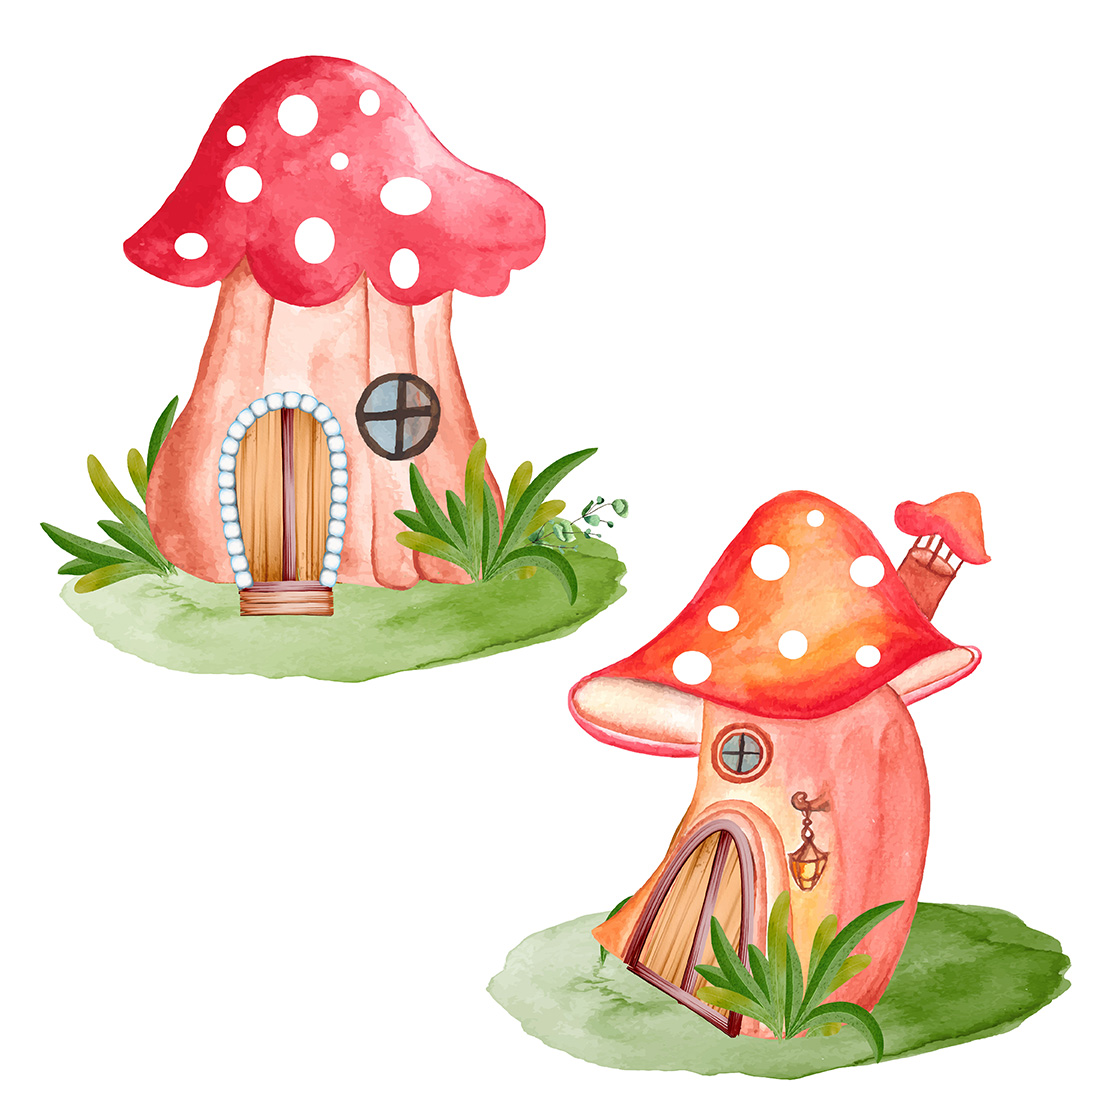 Set of adorable watercolor images of gnome houses